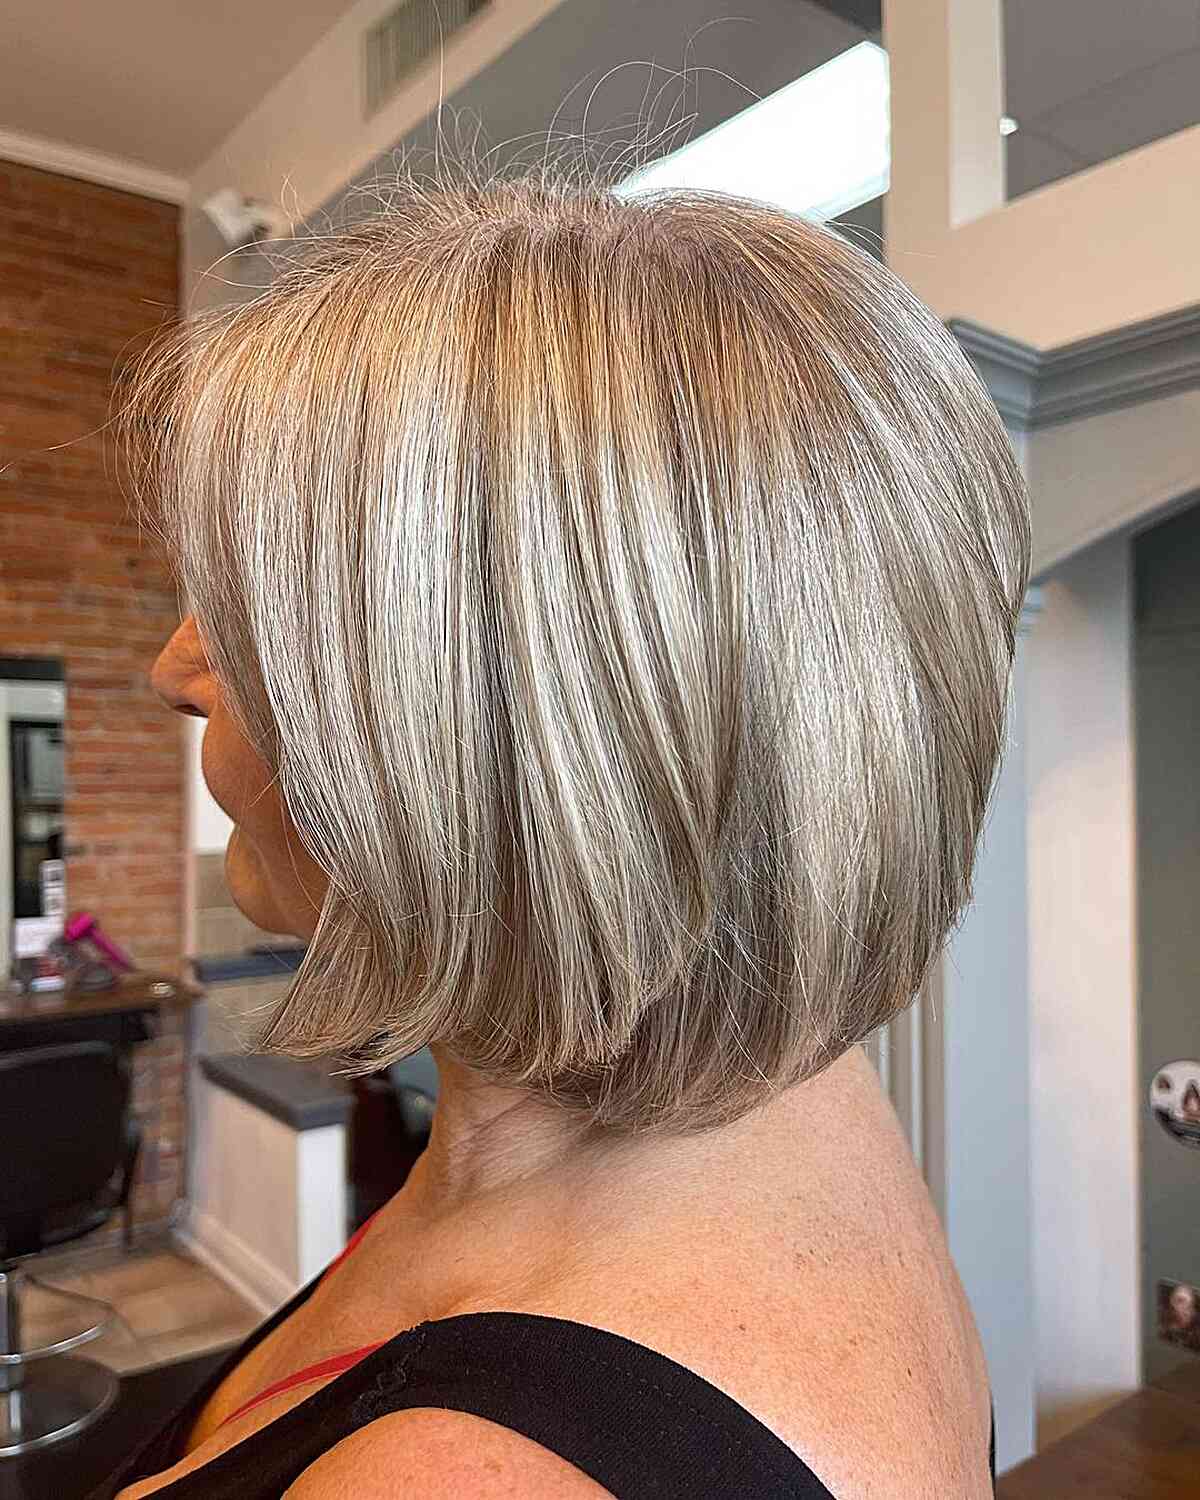 Neck-Length Layered Bob with Beige Silver Highlights for Mature Women with Grey Hair